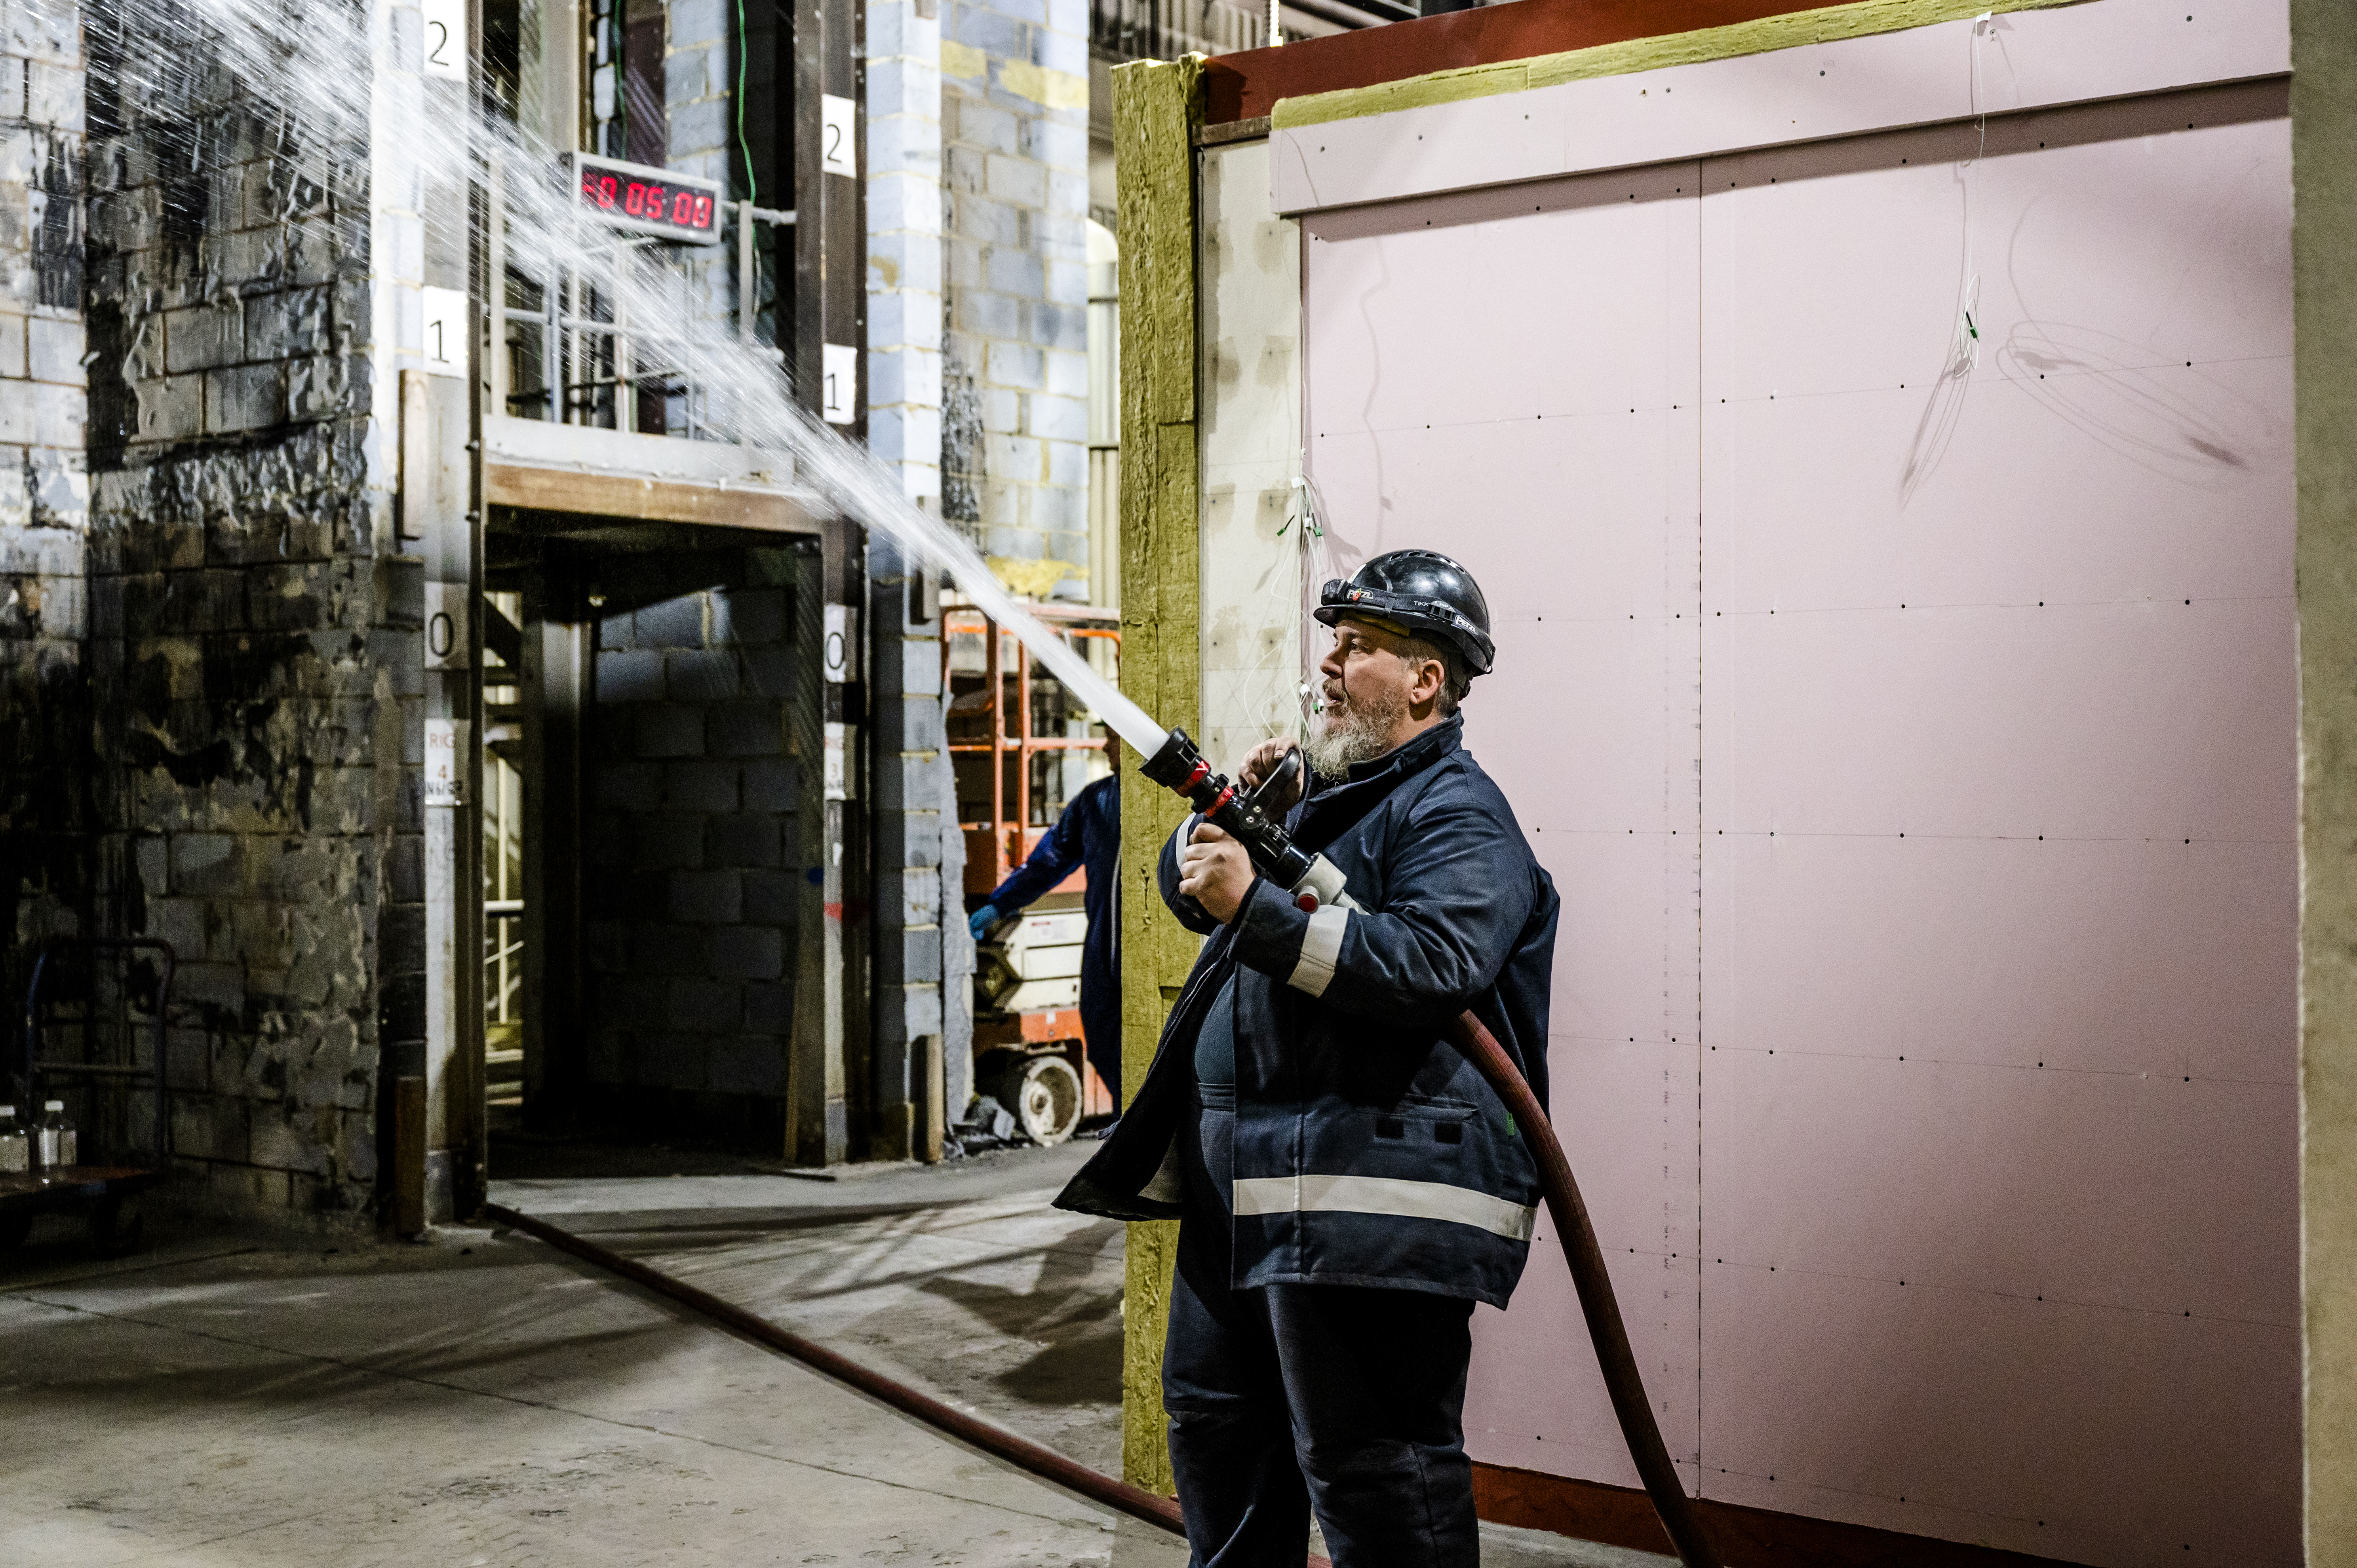 Steel beam fire protection systems tested by BRE 